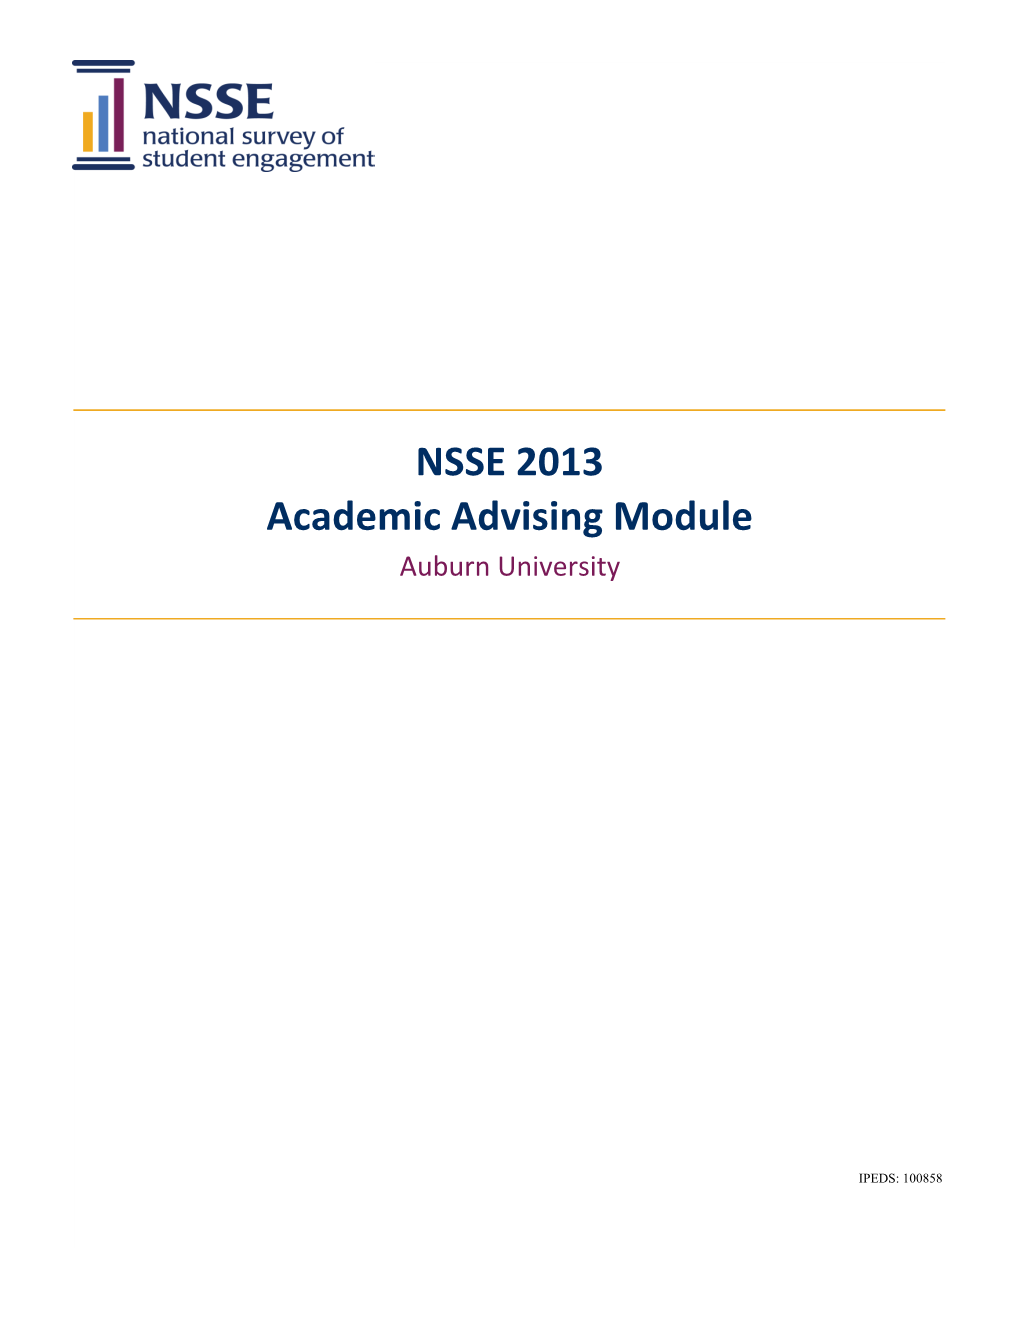 NSSE13 Topical Module